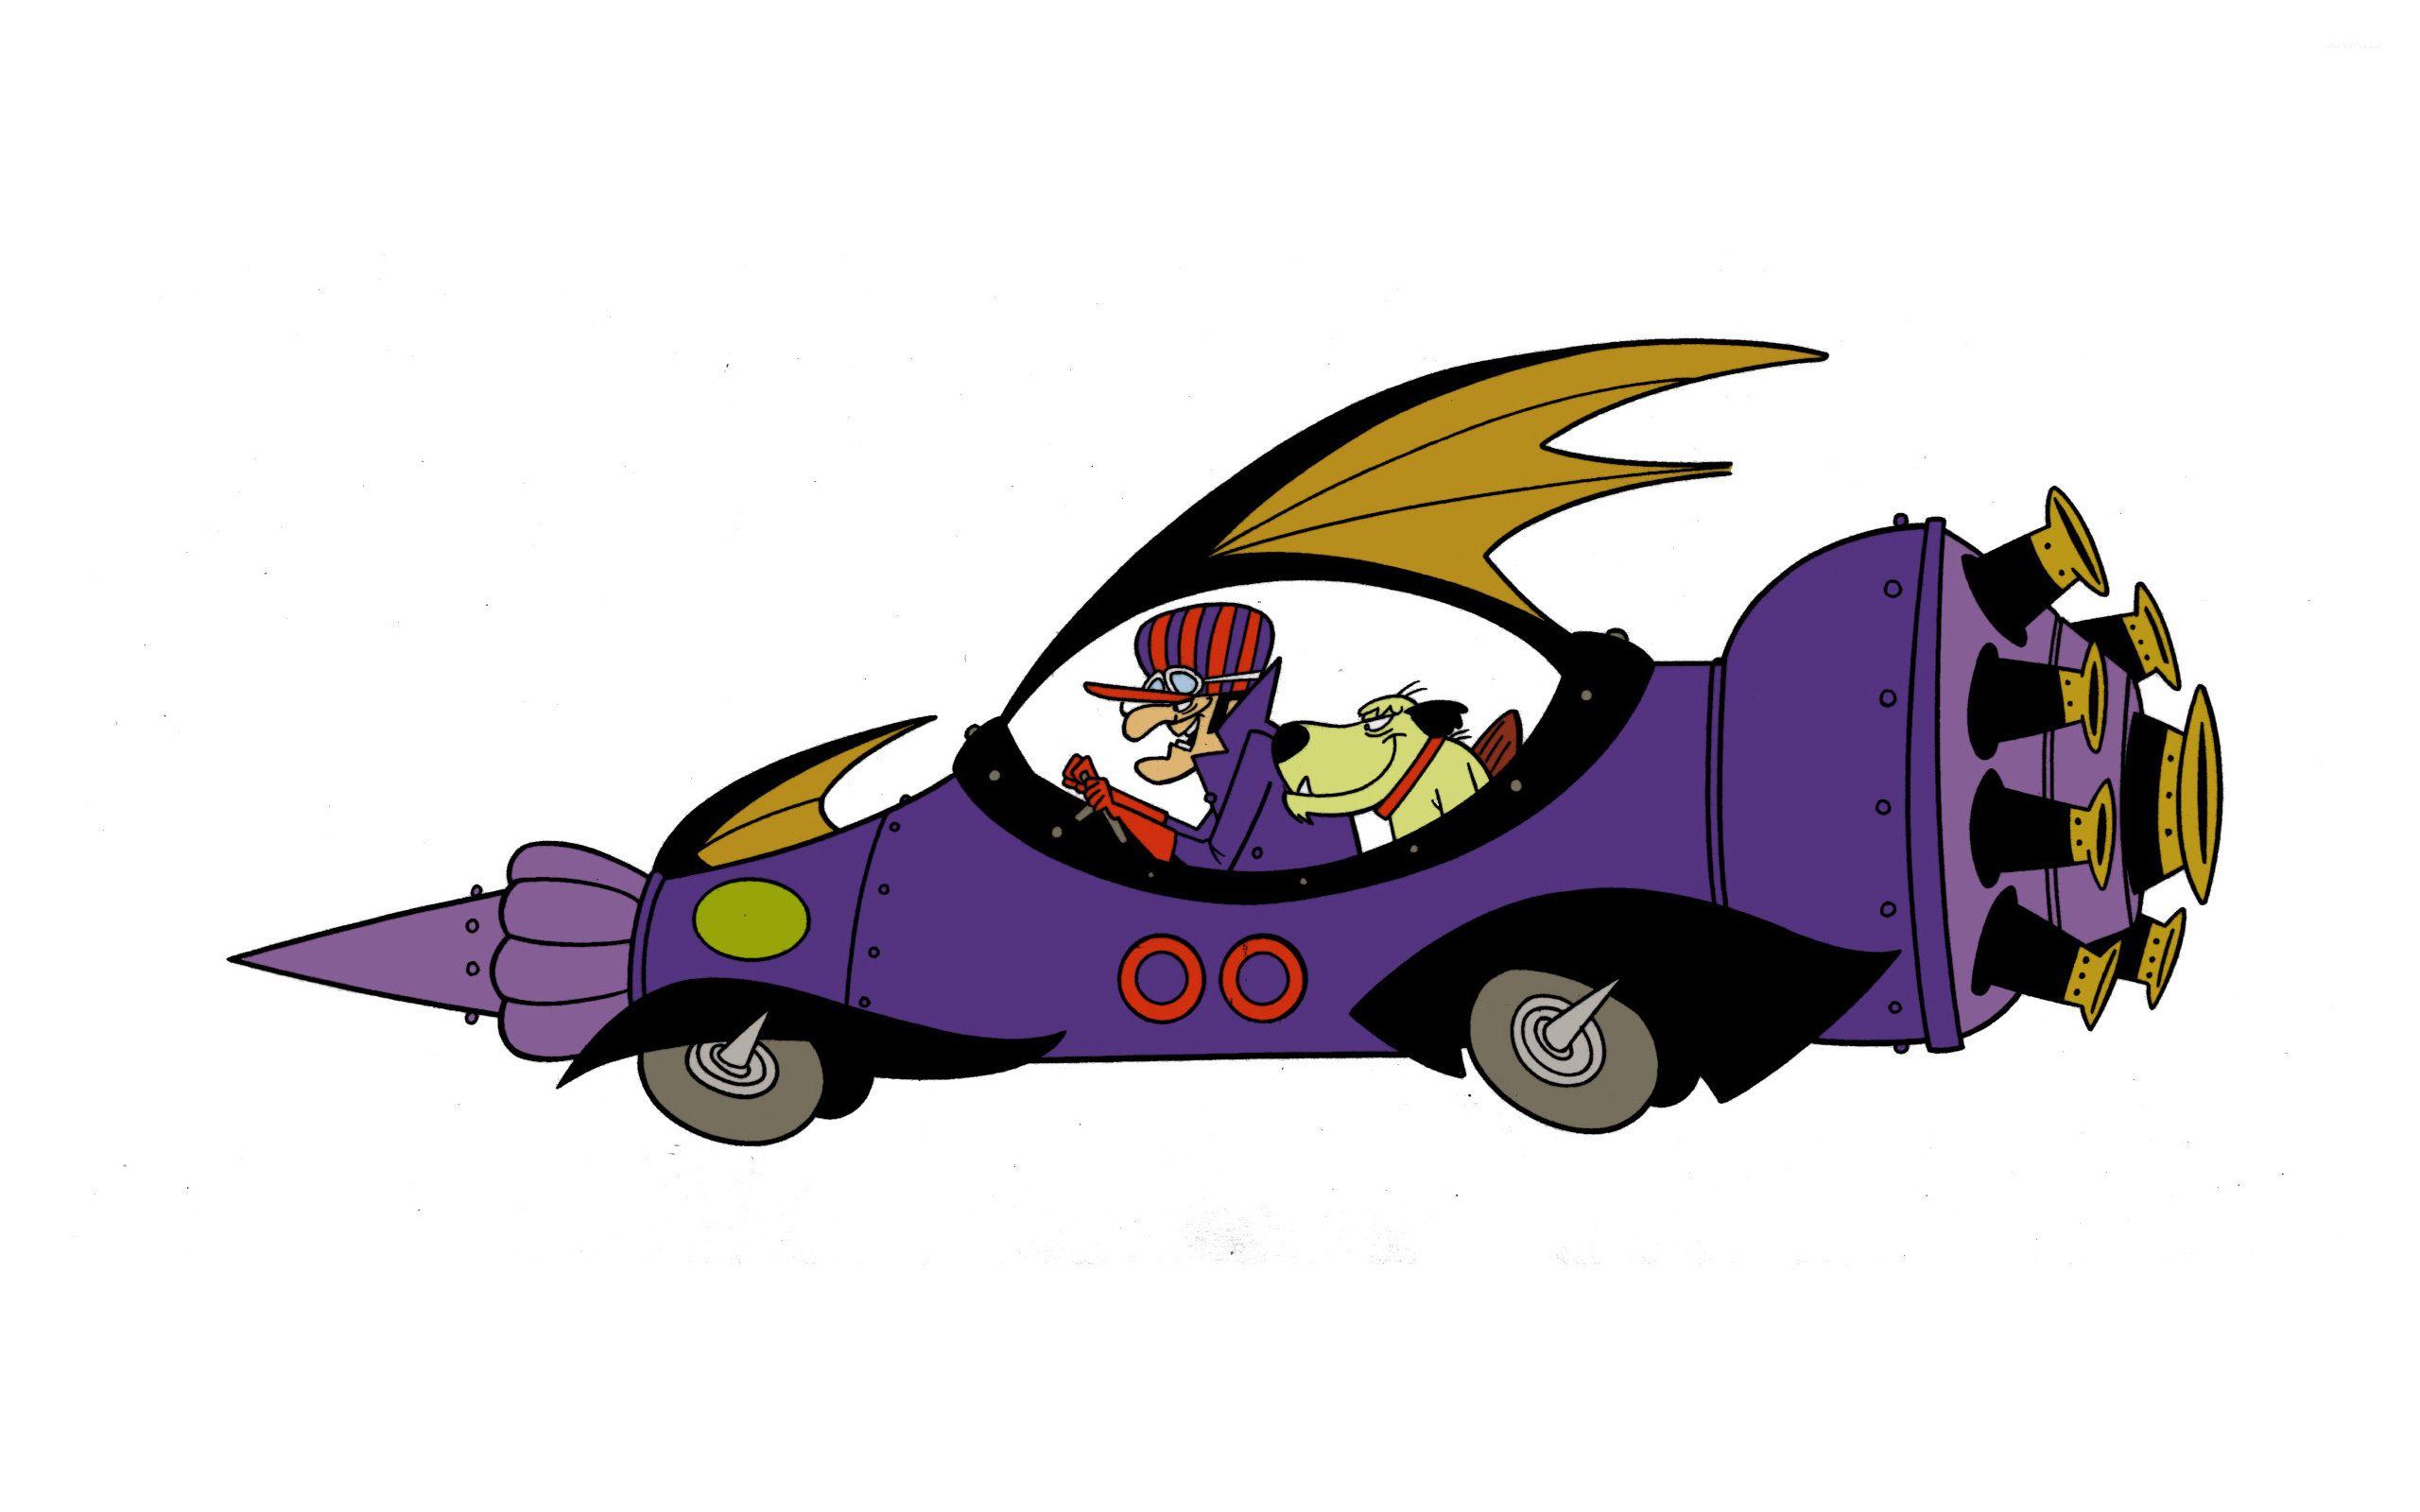 Dick Dastardly and Muttley in the Mean Machine 00 wallpaper